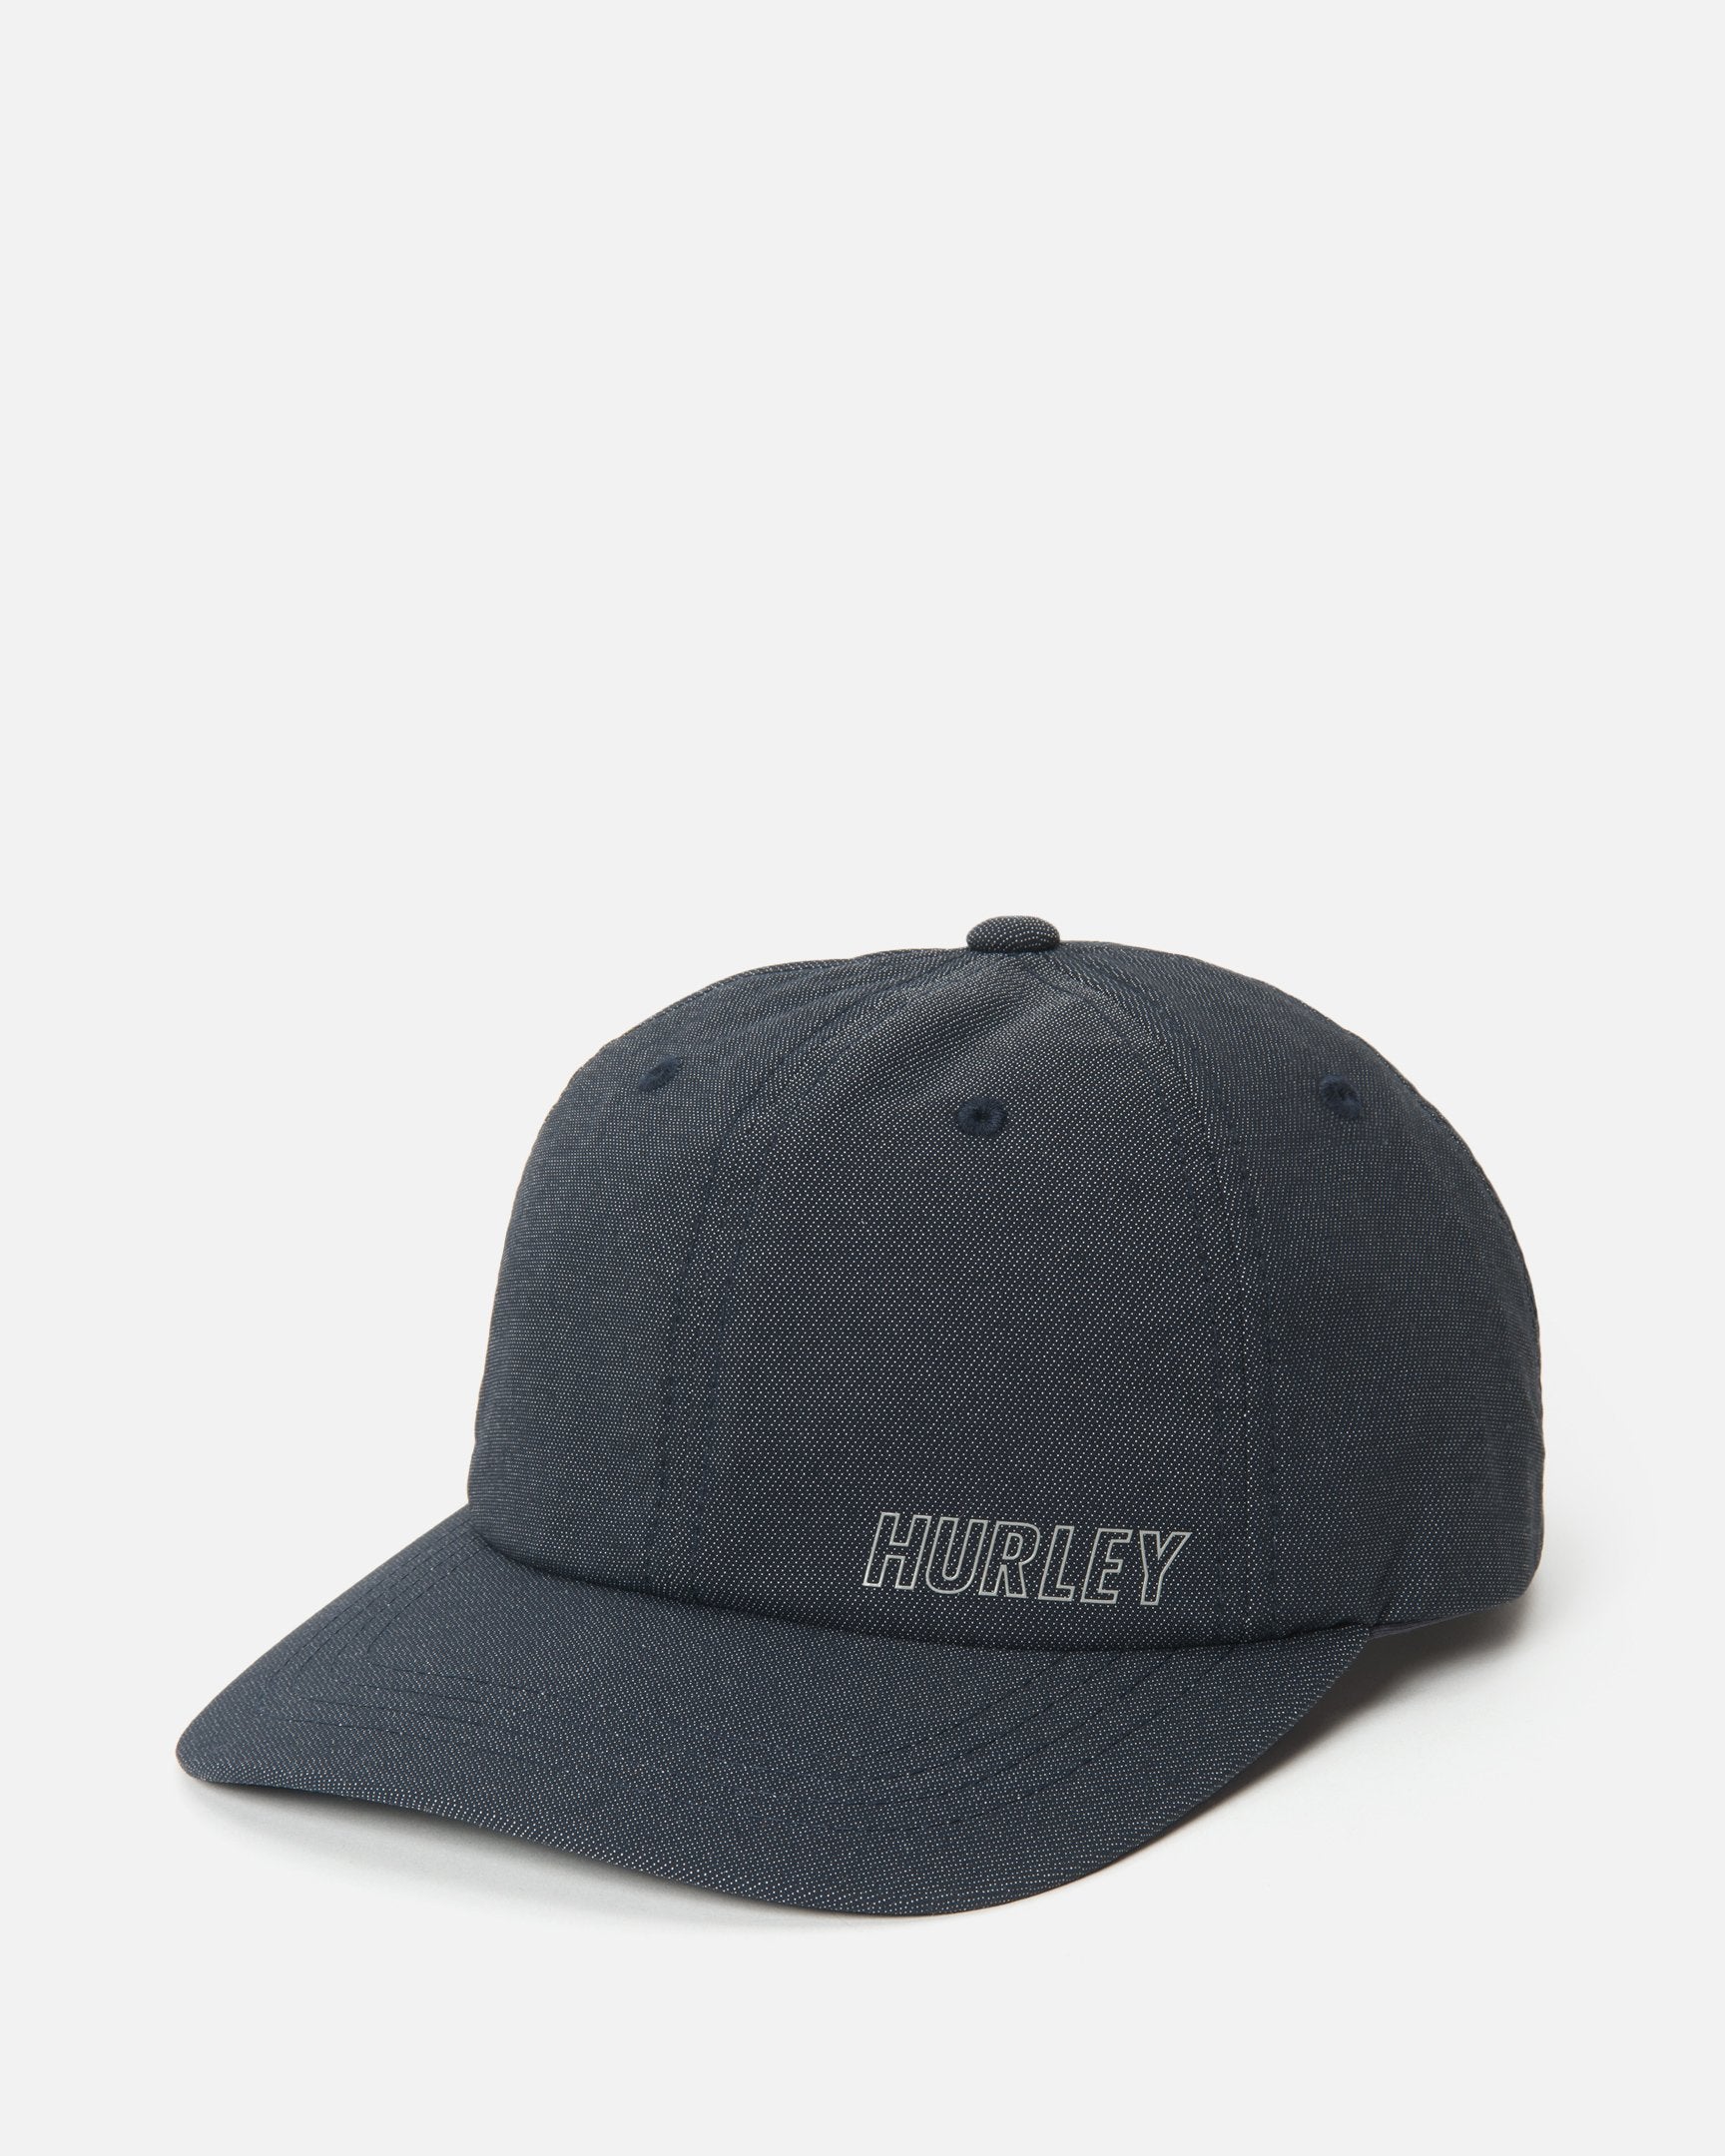 Shop Now For The Hurley H2O-Dri Hurricane Onshore Hat in Black ...